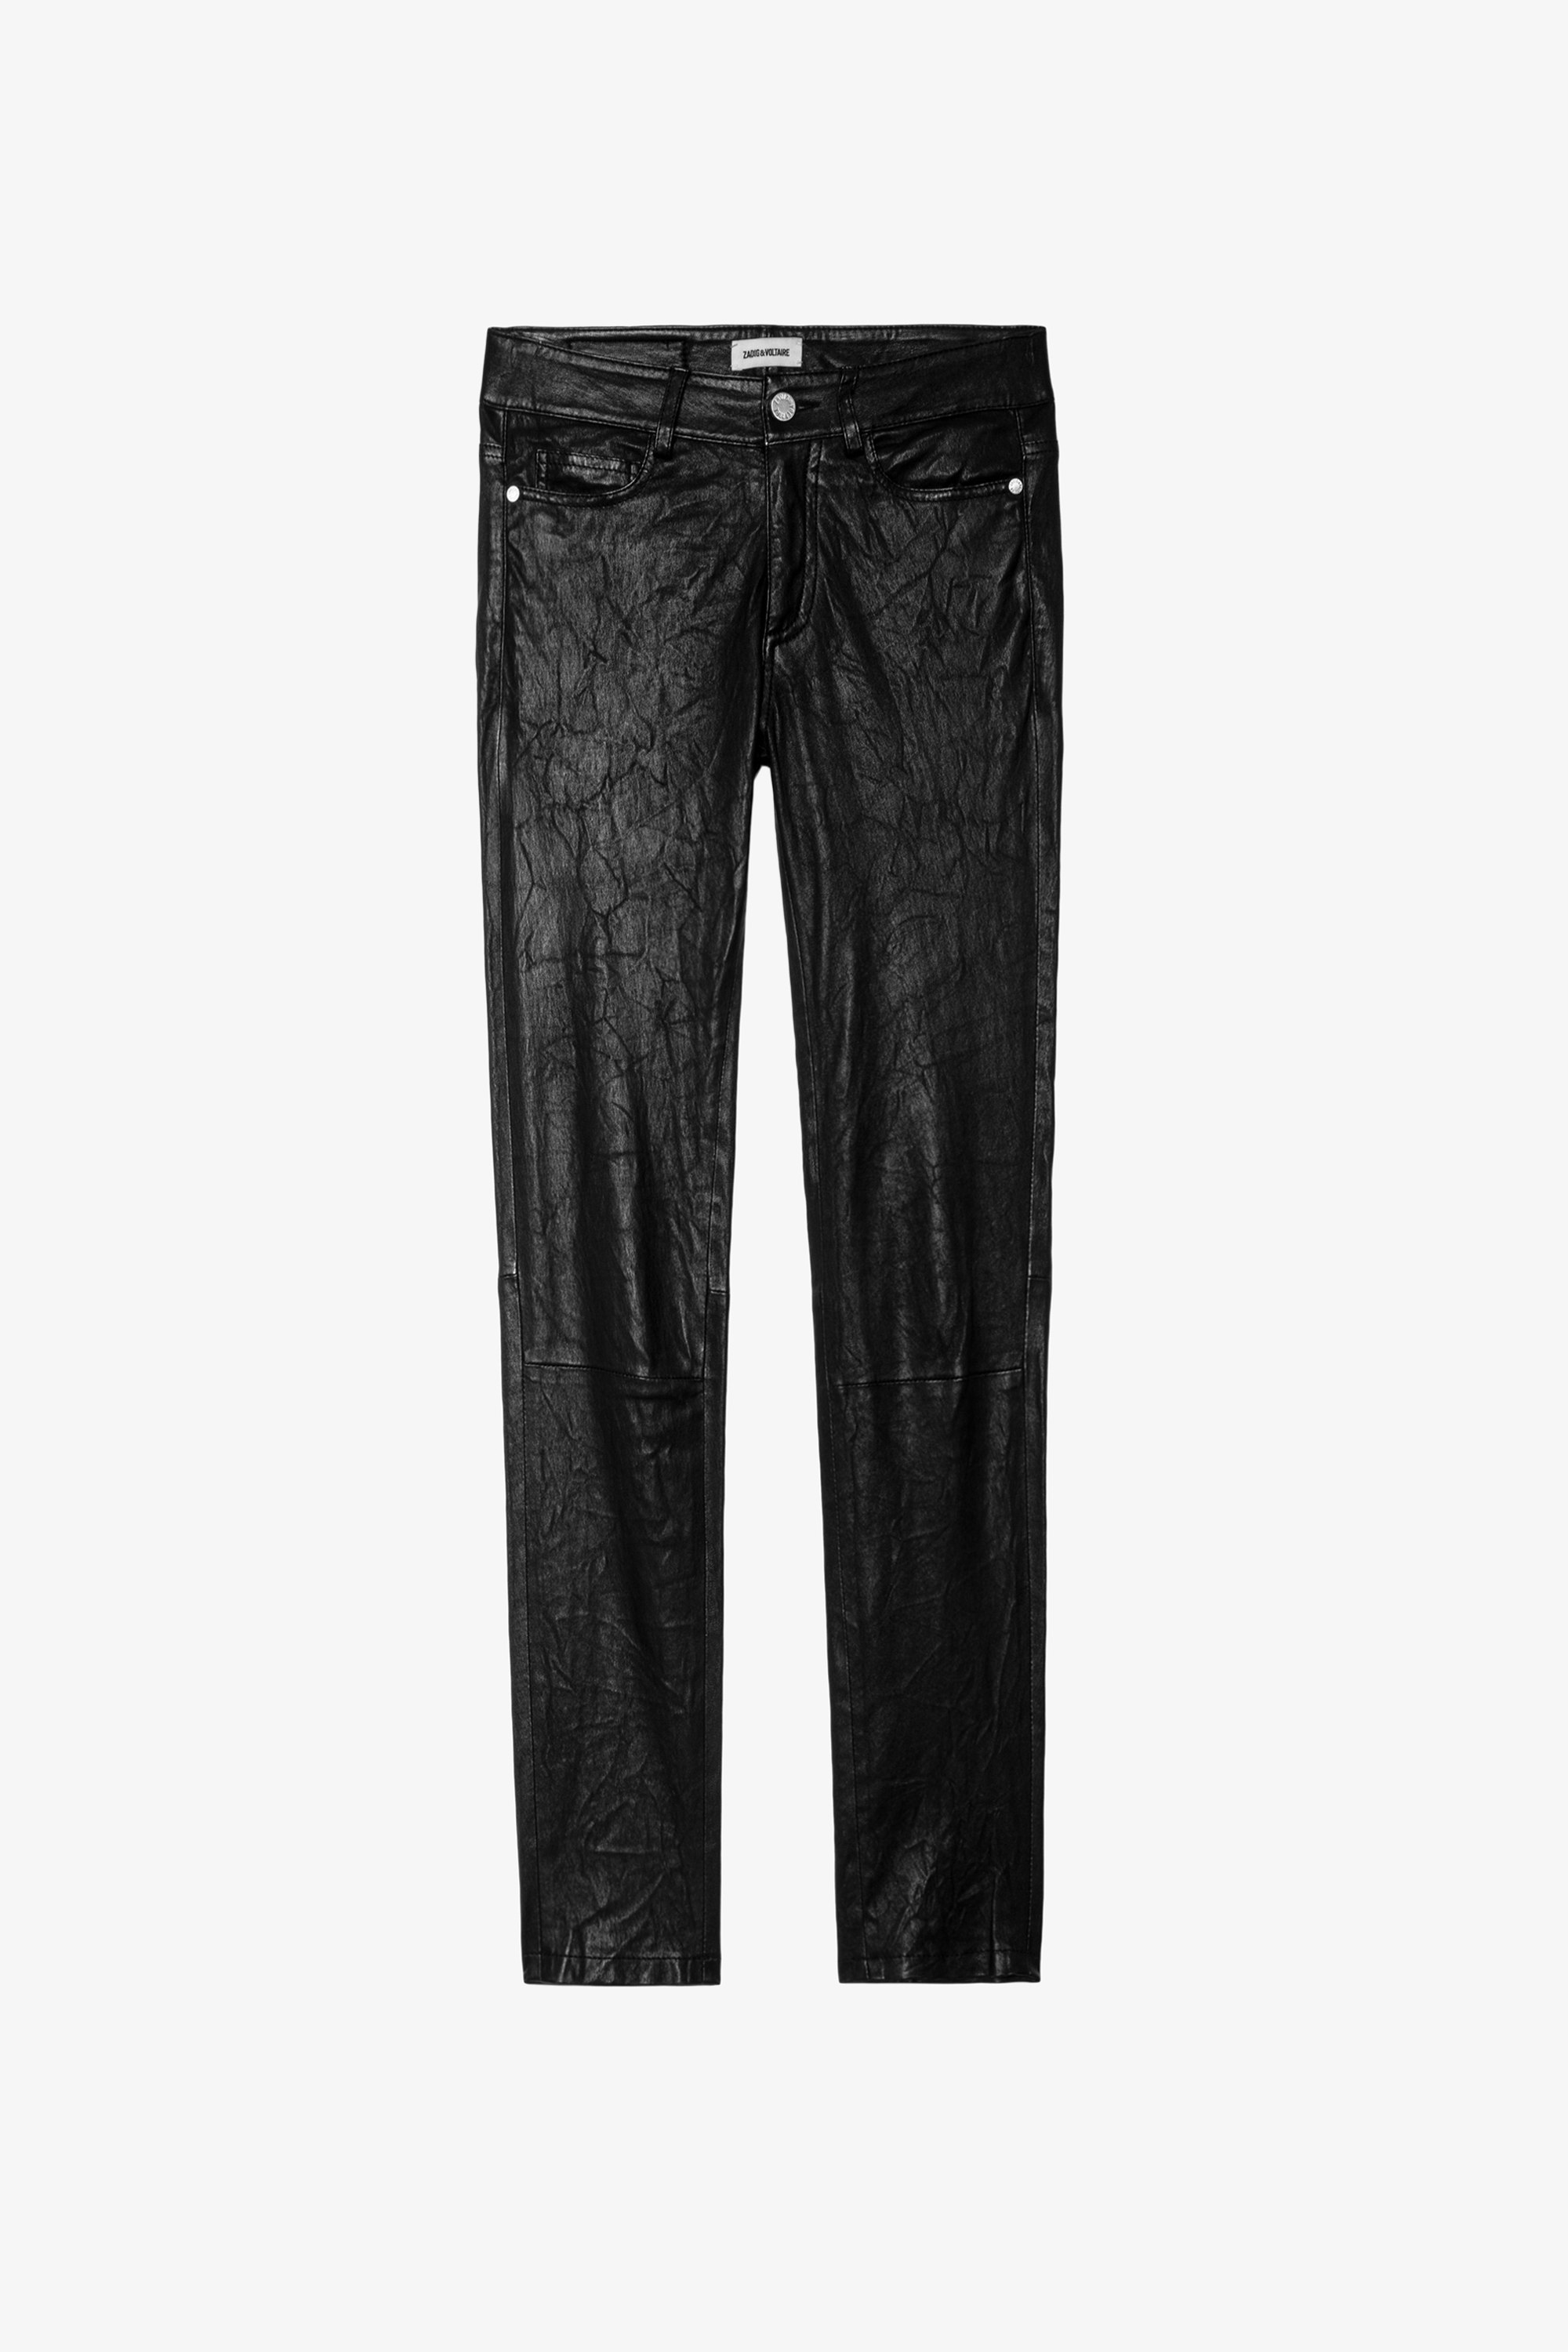 Phlame Crinkle Leather Pants - Women's black leather pants